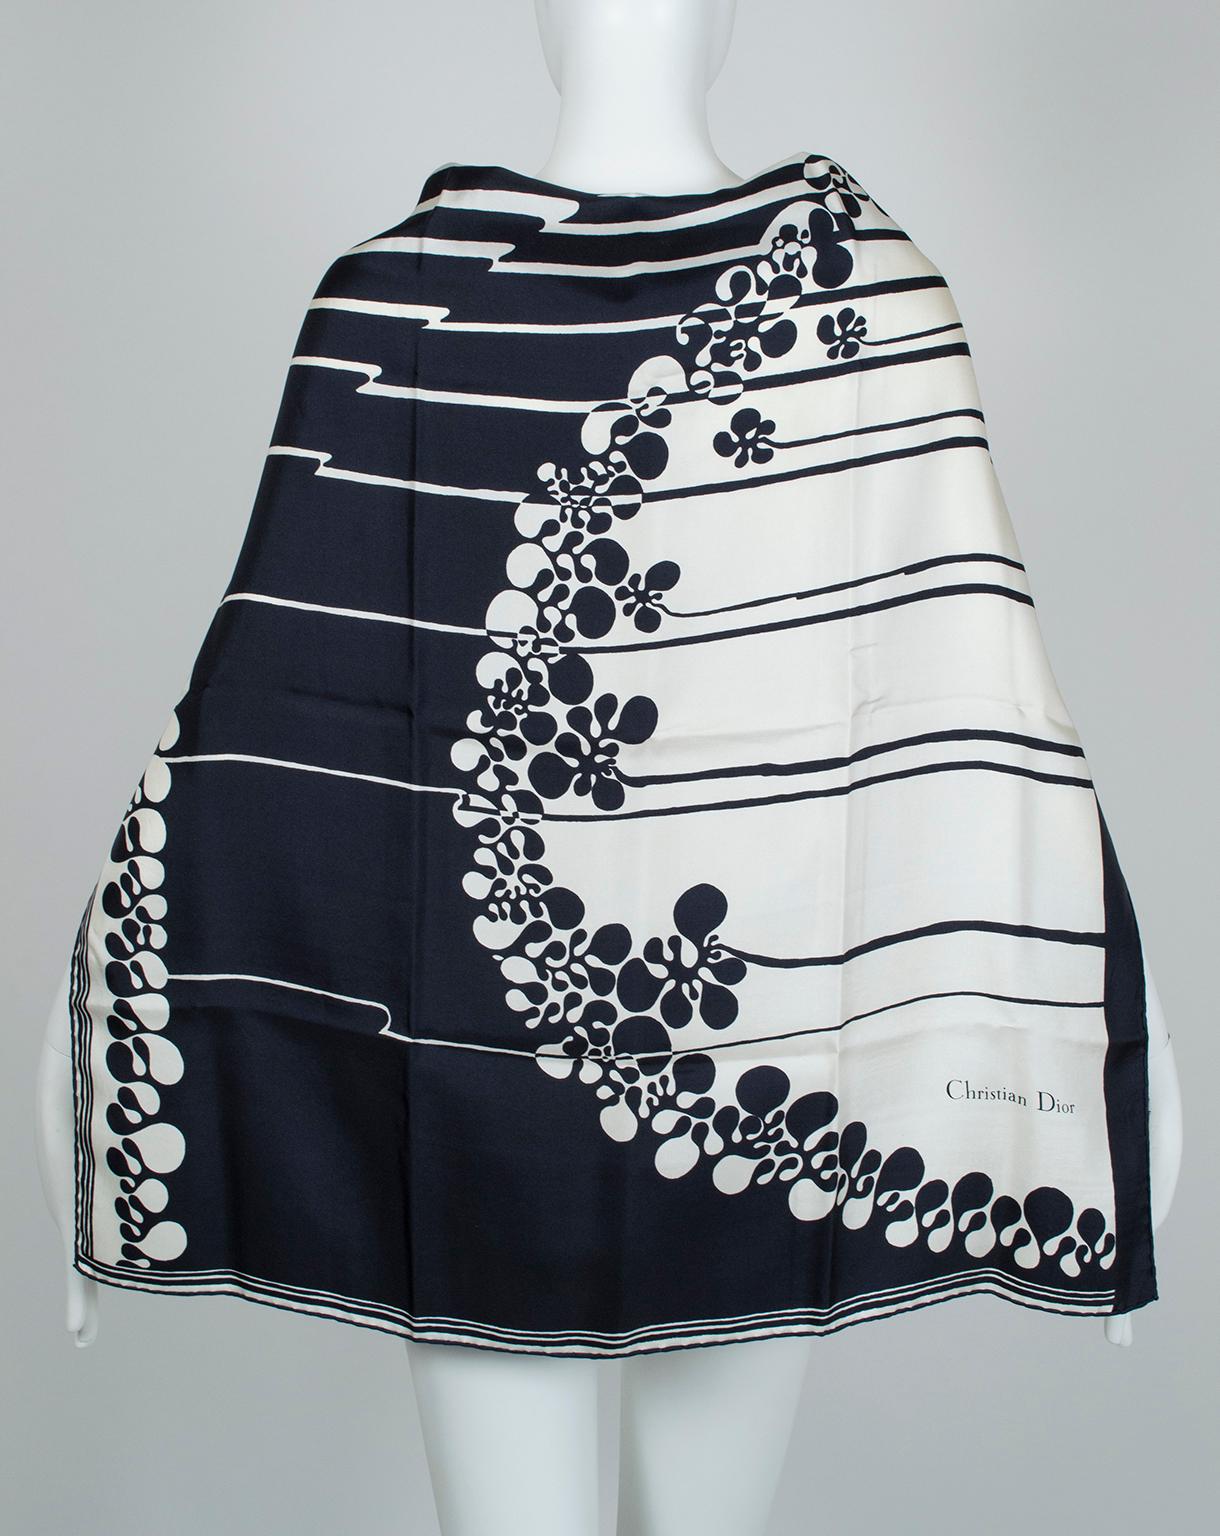 Stark black and white lines and curves embellish this oversized square scarf, large enough to wear around the shoulders, in the hair or on your handbag. Pretty enough to frame!

Single-ply silk twill scarf with rolled edges. Square format features